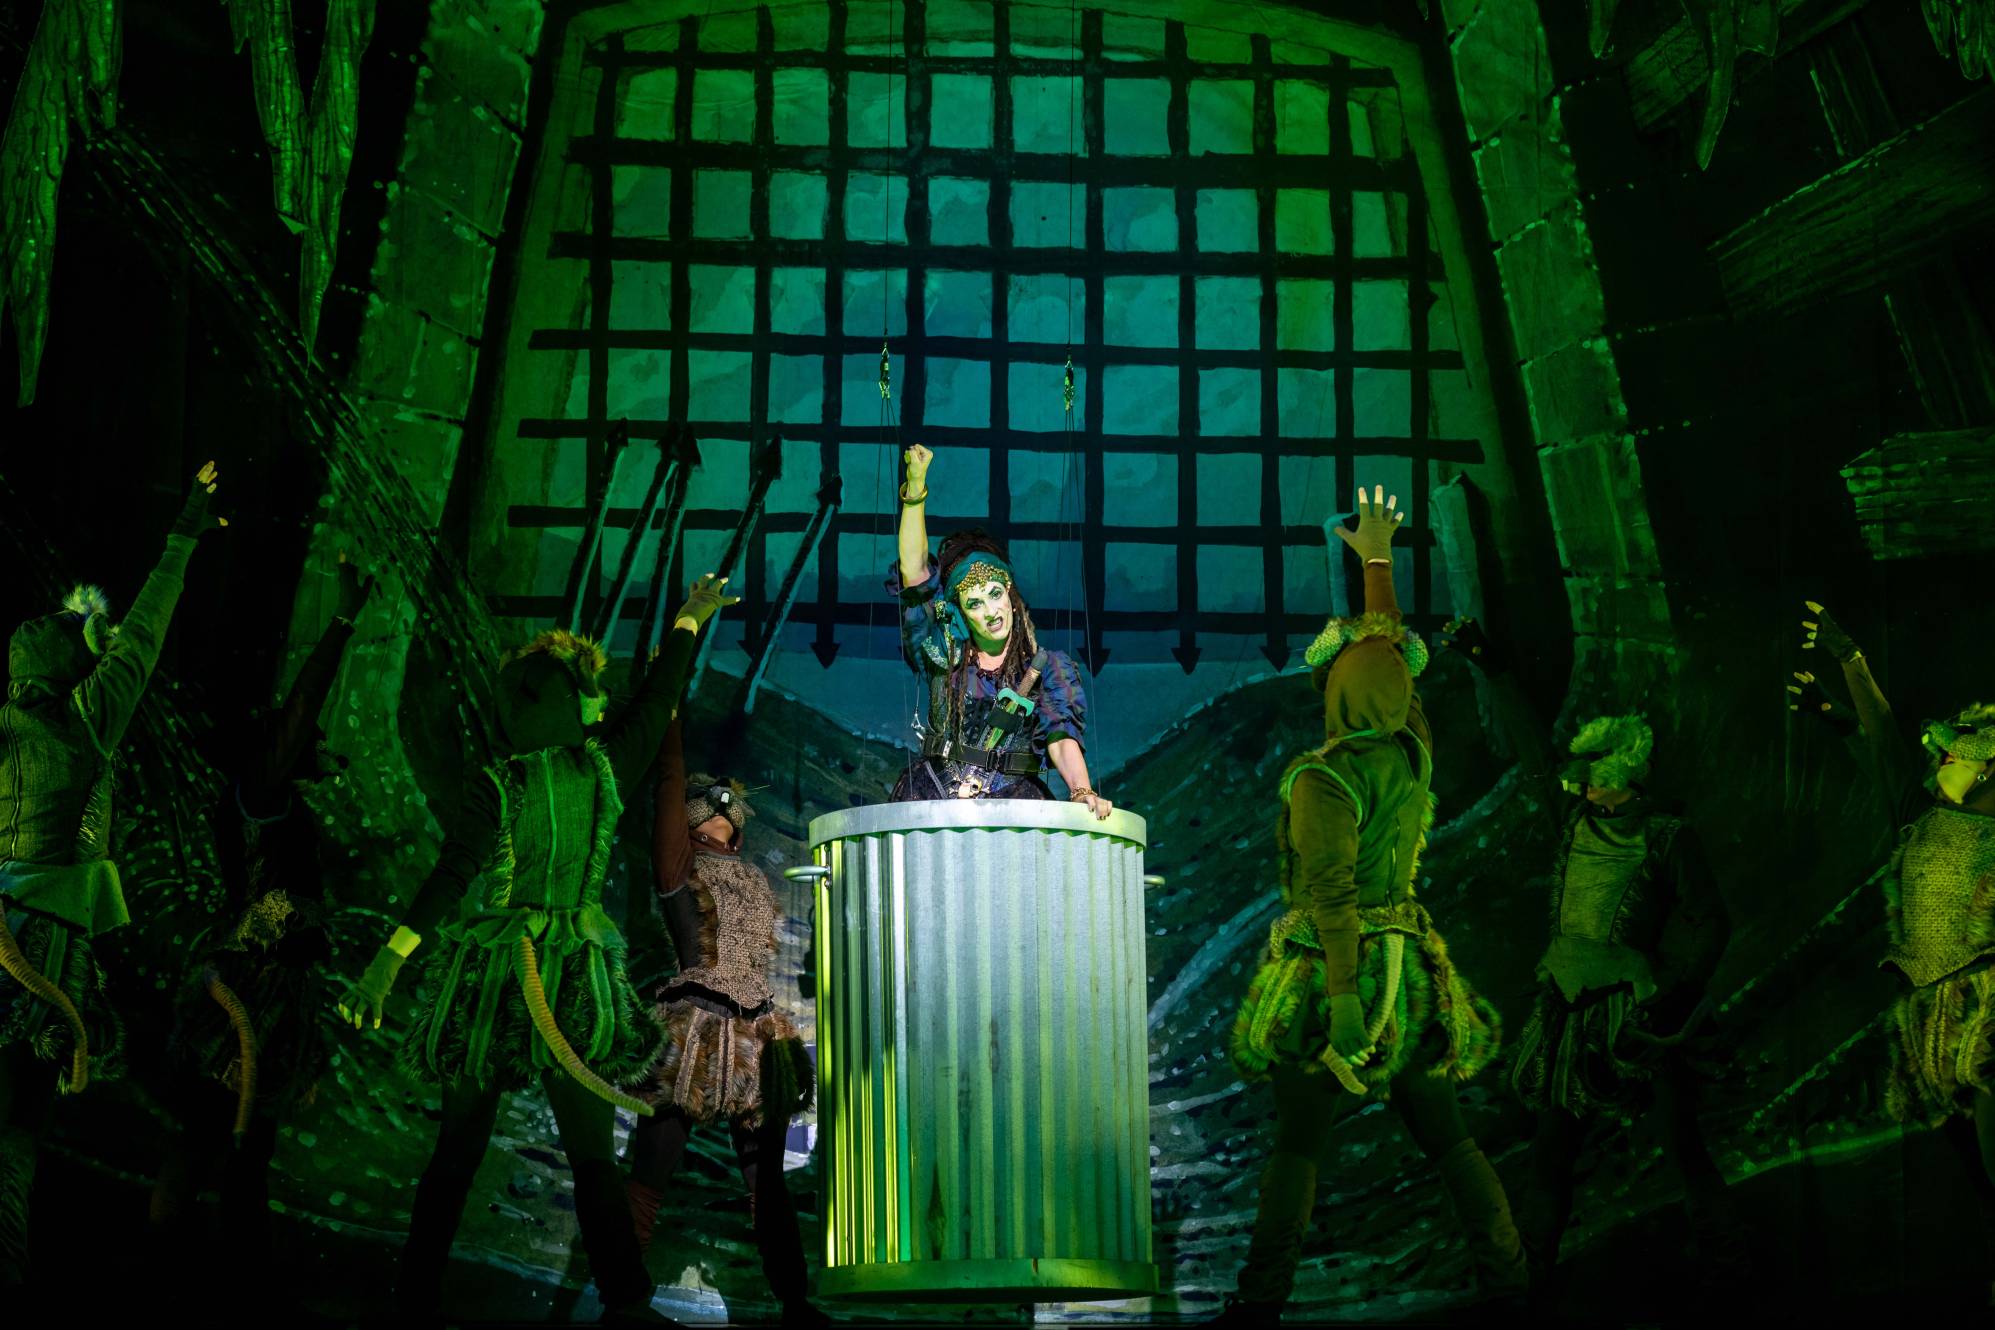 stage shot from Dick Whittington, several theatrical rats dance around a stage